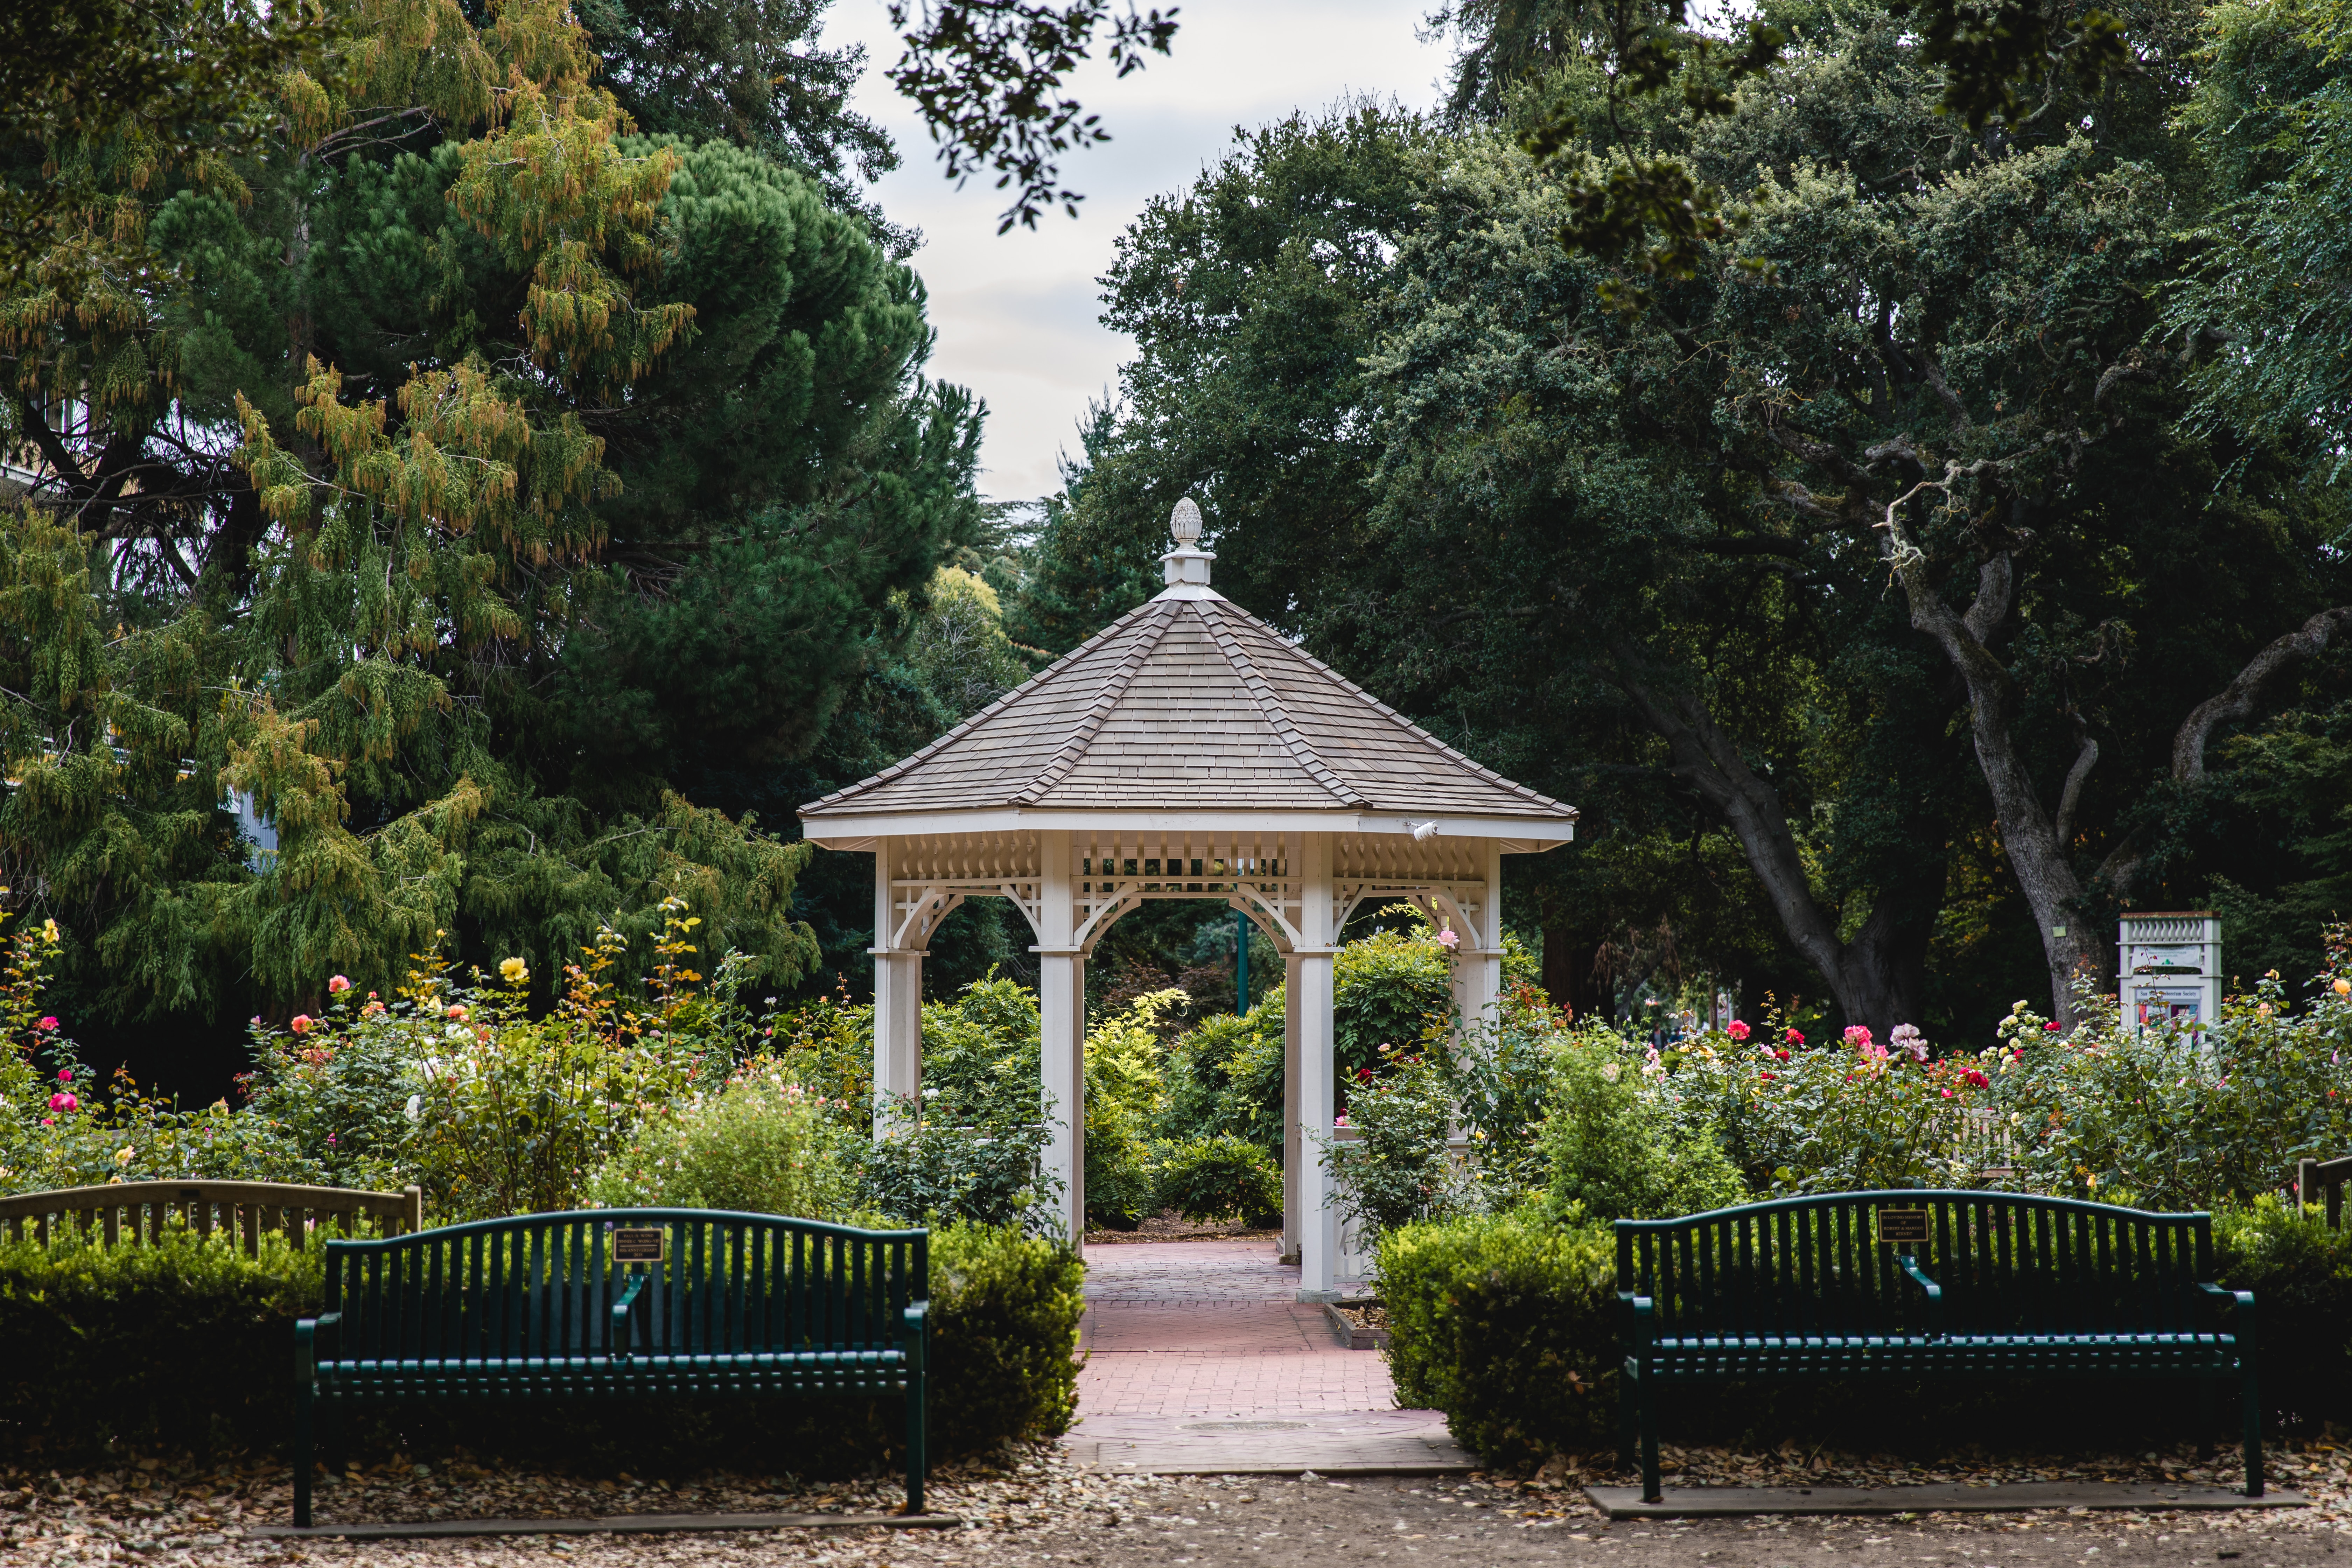 Palm-shaded gazebo in a tranquil park